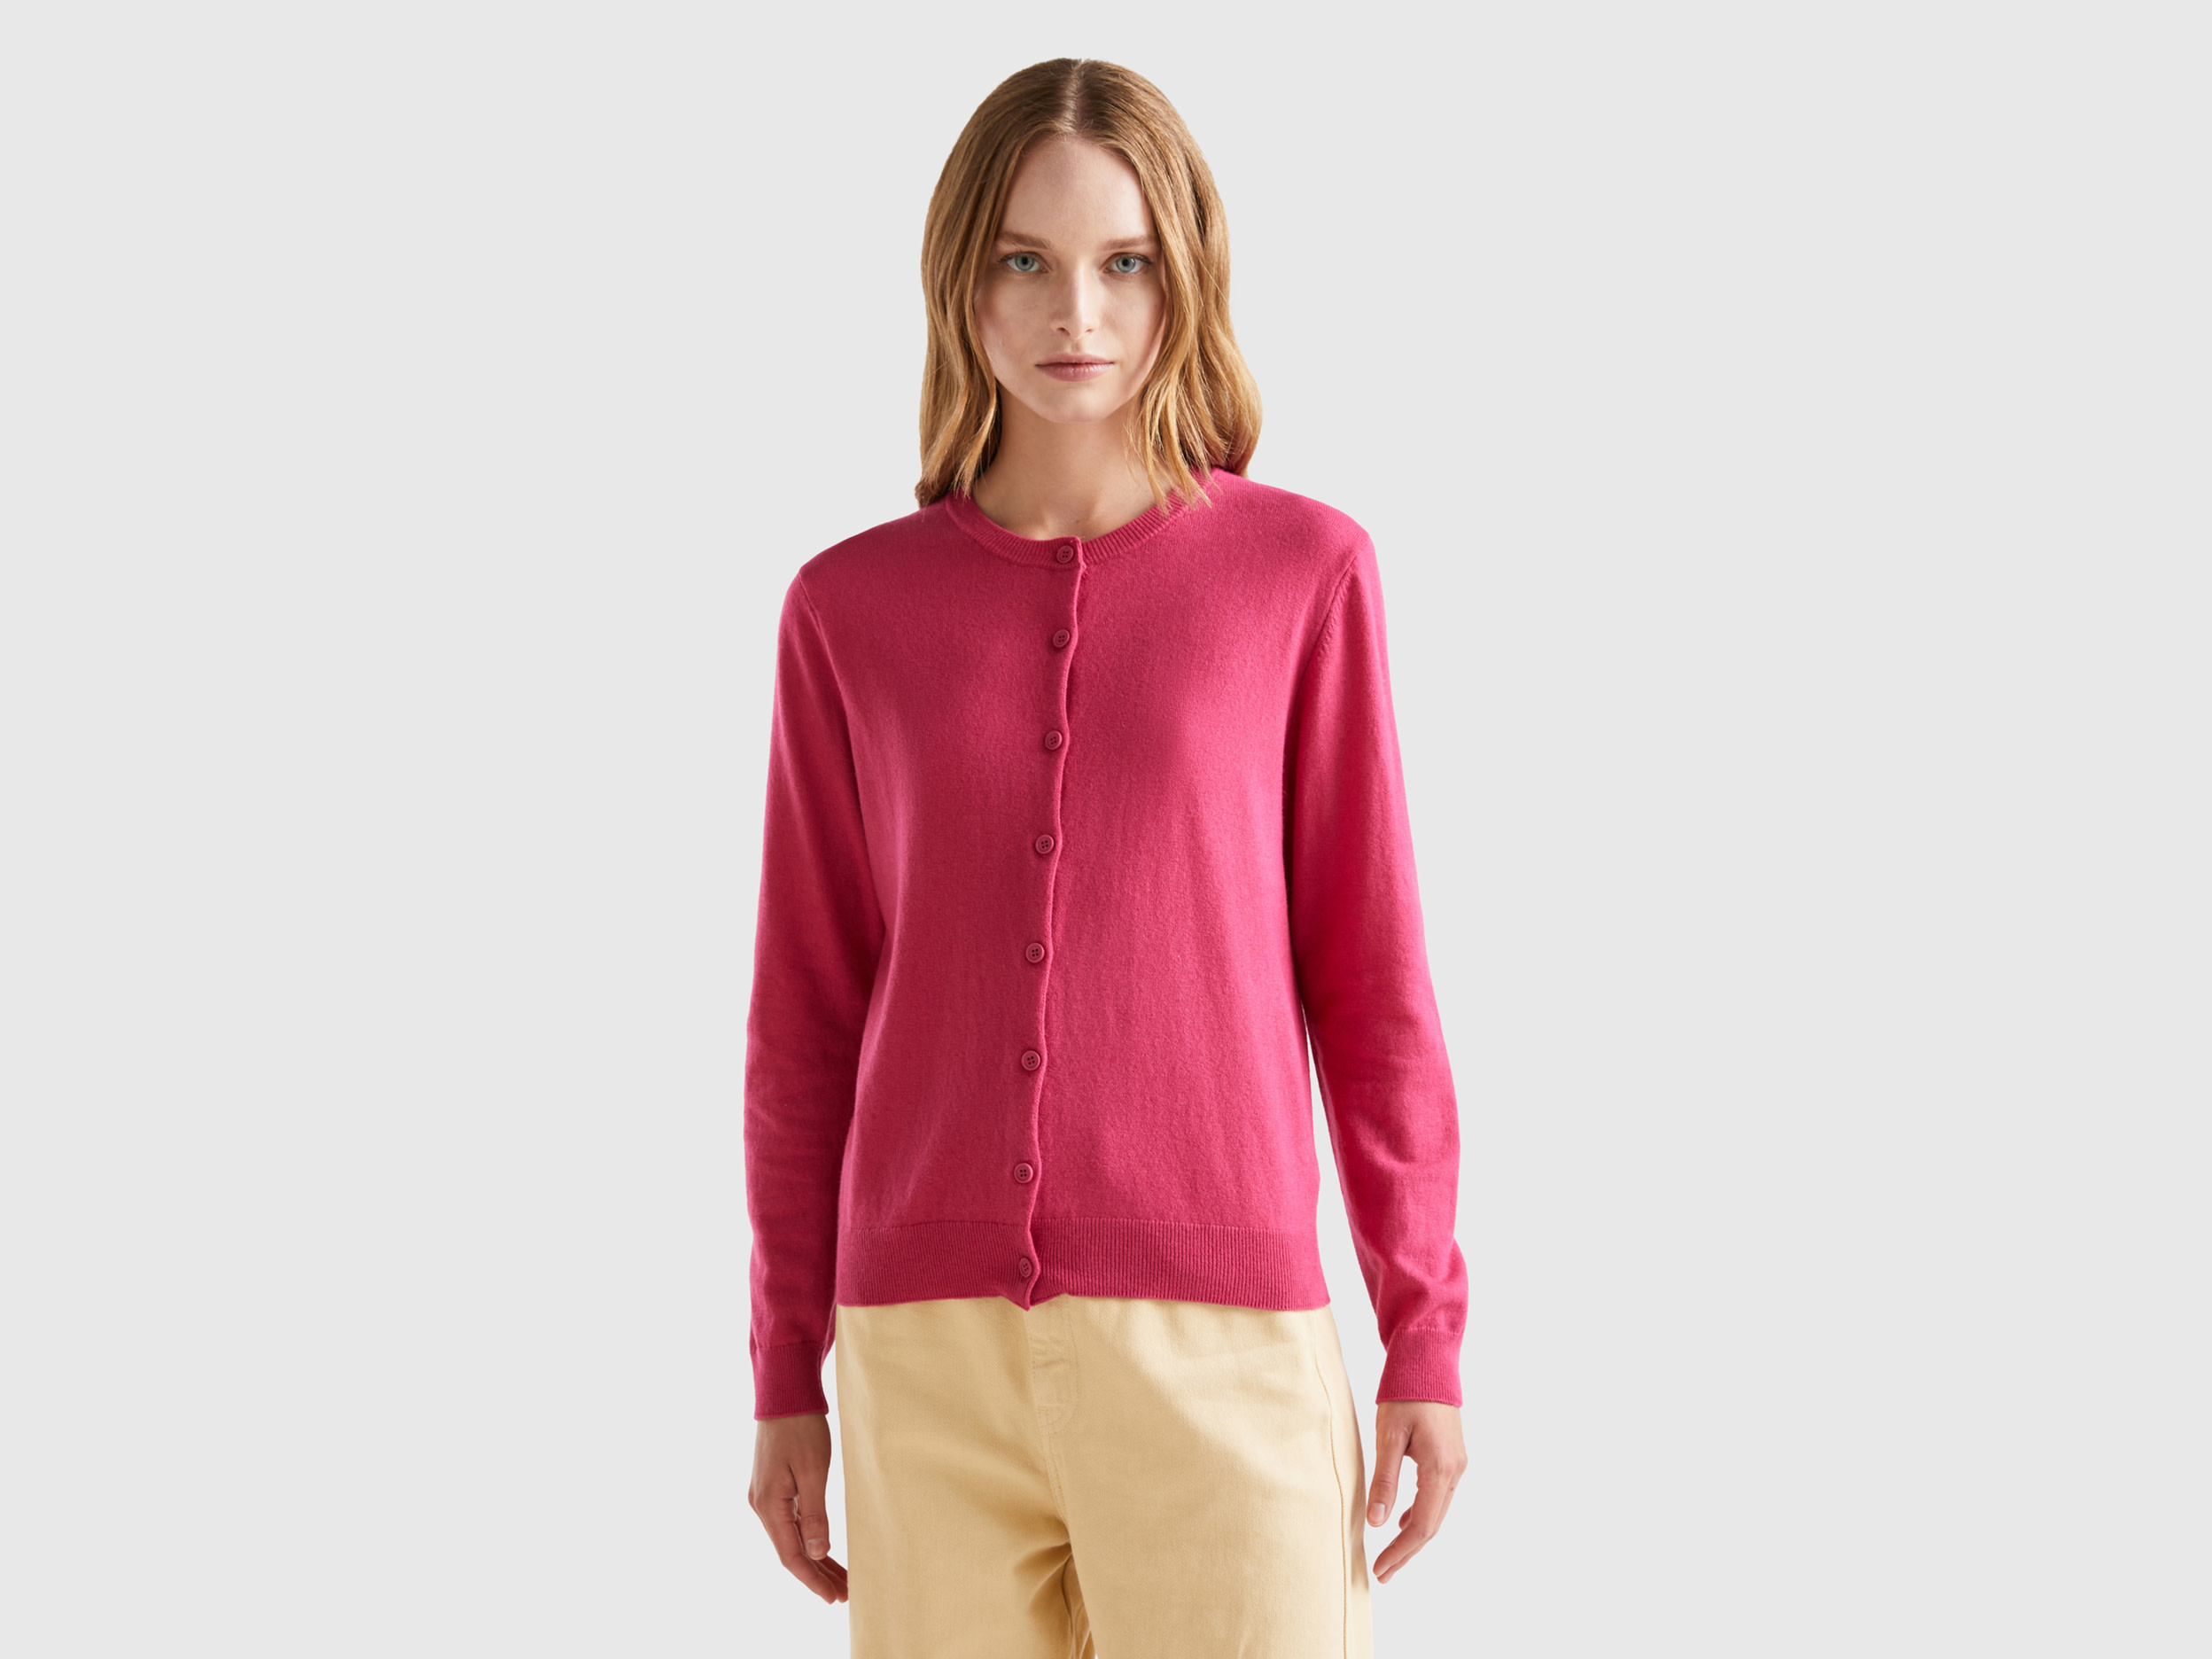 Benetton, Magenta Red Cardigan In Cashmere And Wool Blend, size XL, Cyclamen, Women